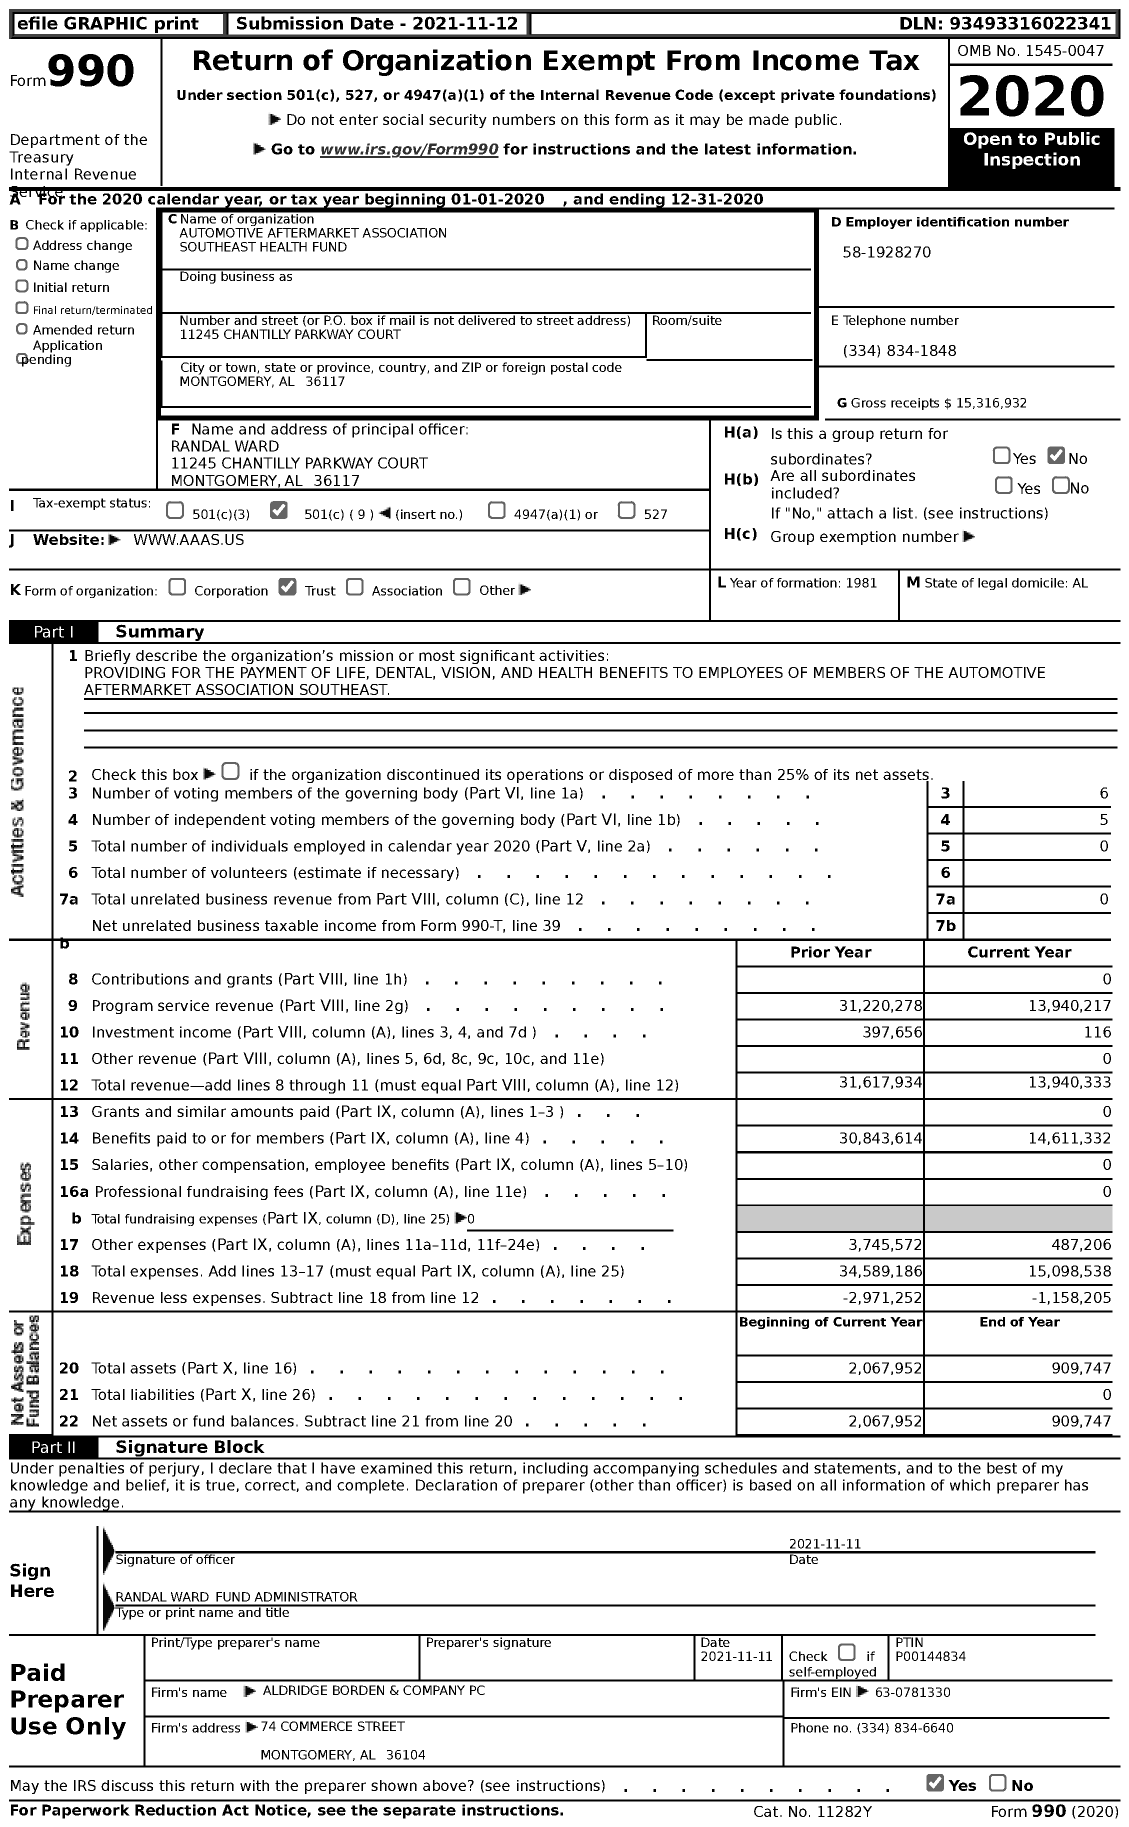 Image of first page of 2020 Form 990 for Automotive Aftermarket Association Southeast Health Fund